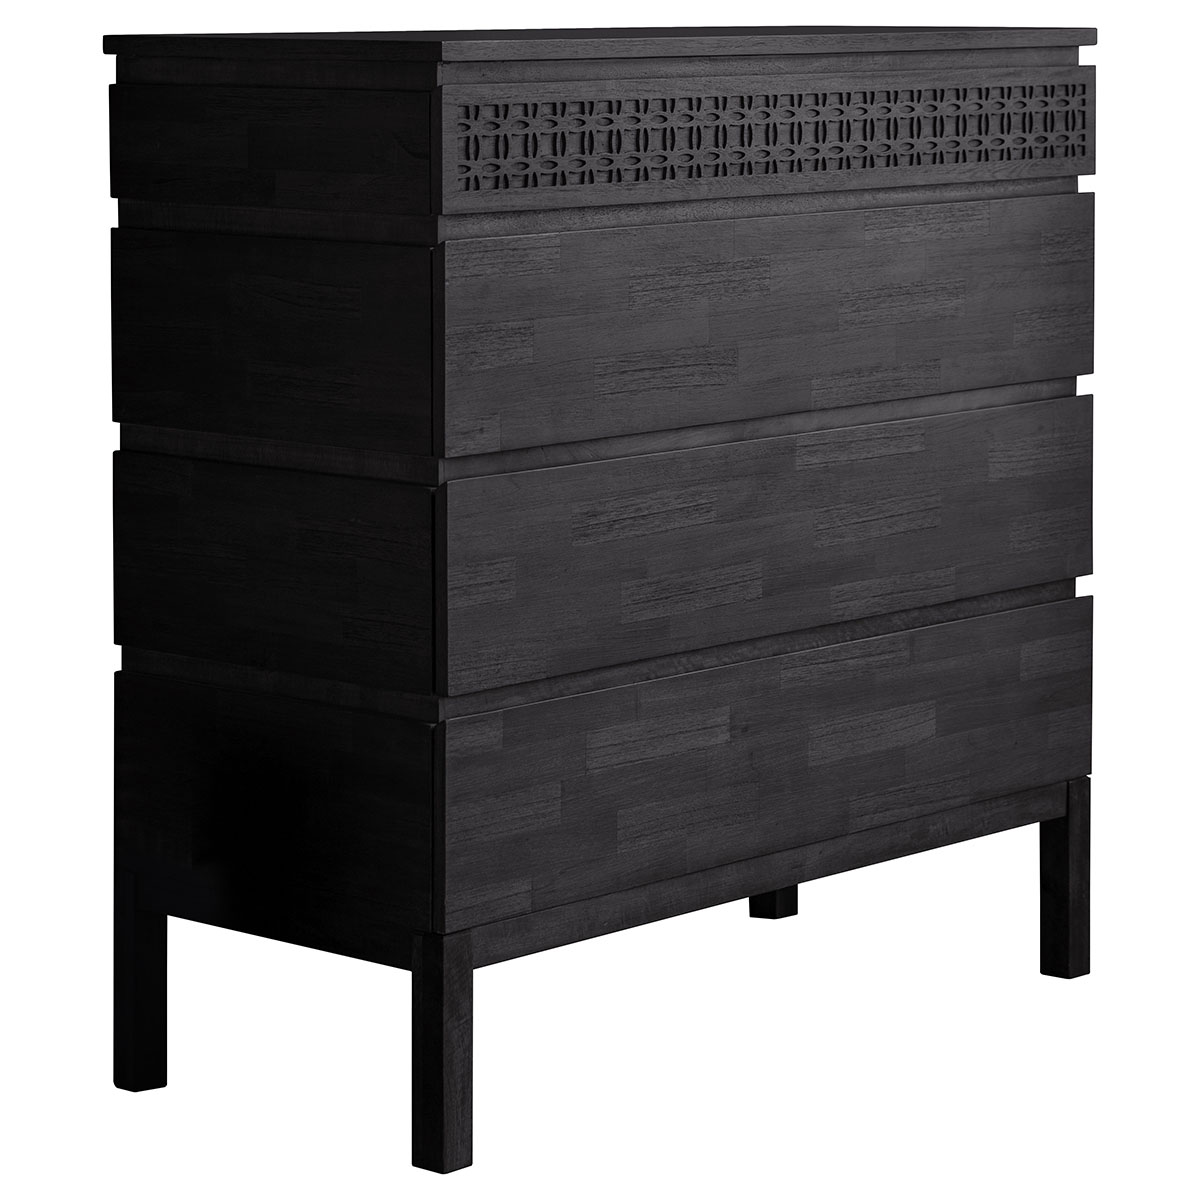 Boho Boutique 4 Drawer Chest 1000x460x1040mm